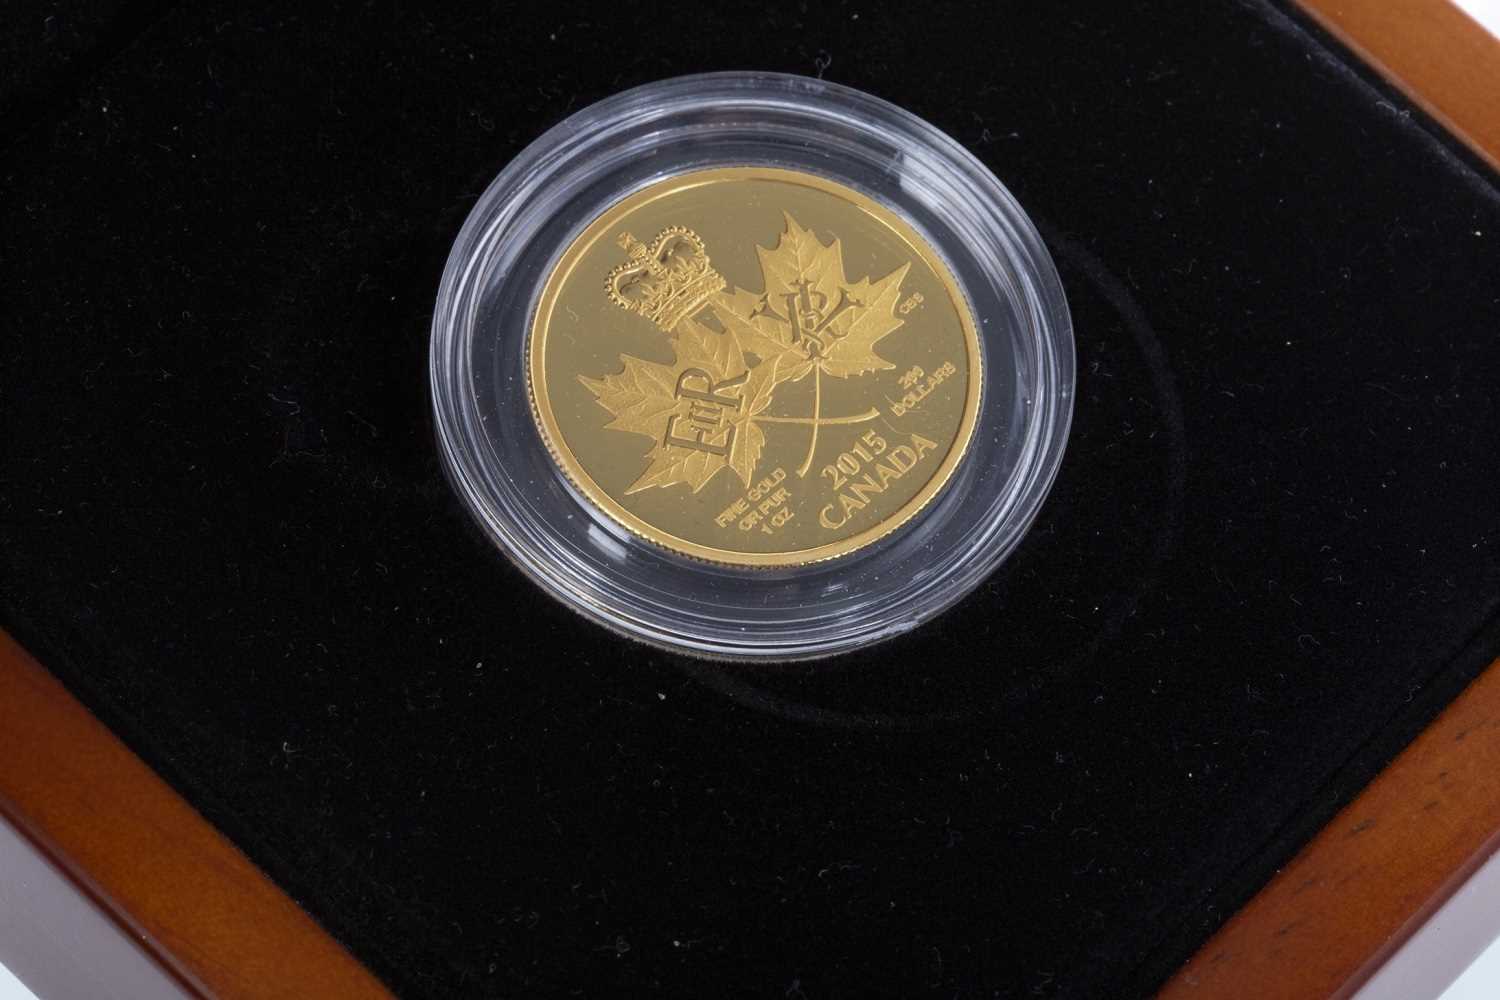 Lot 518 - A THE ROYAL CANADIAN MINT 2015 $200 GOLD COIN